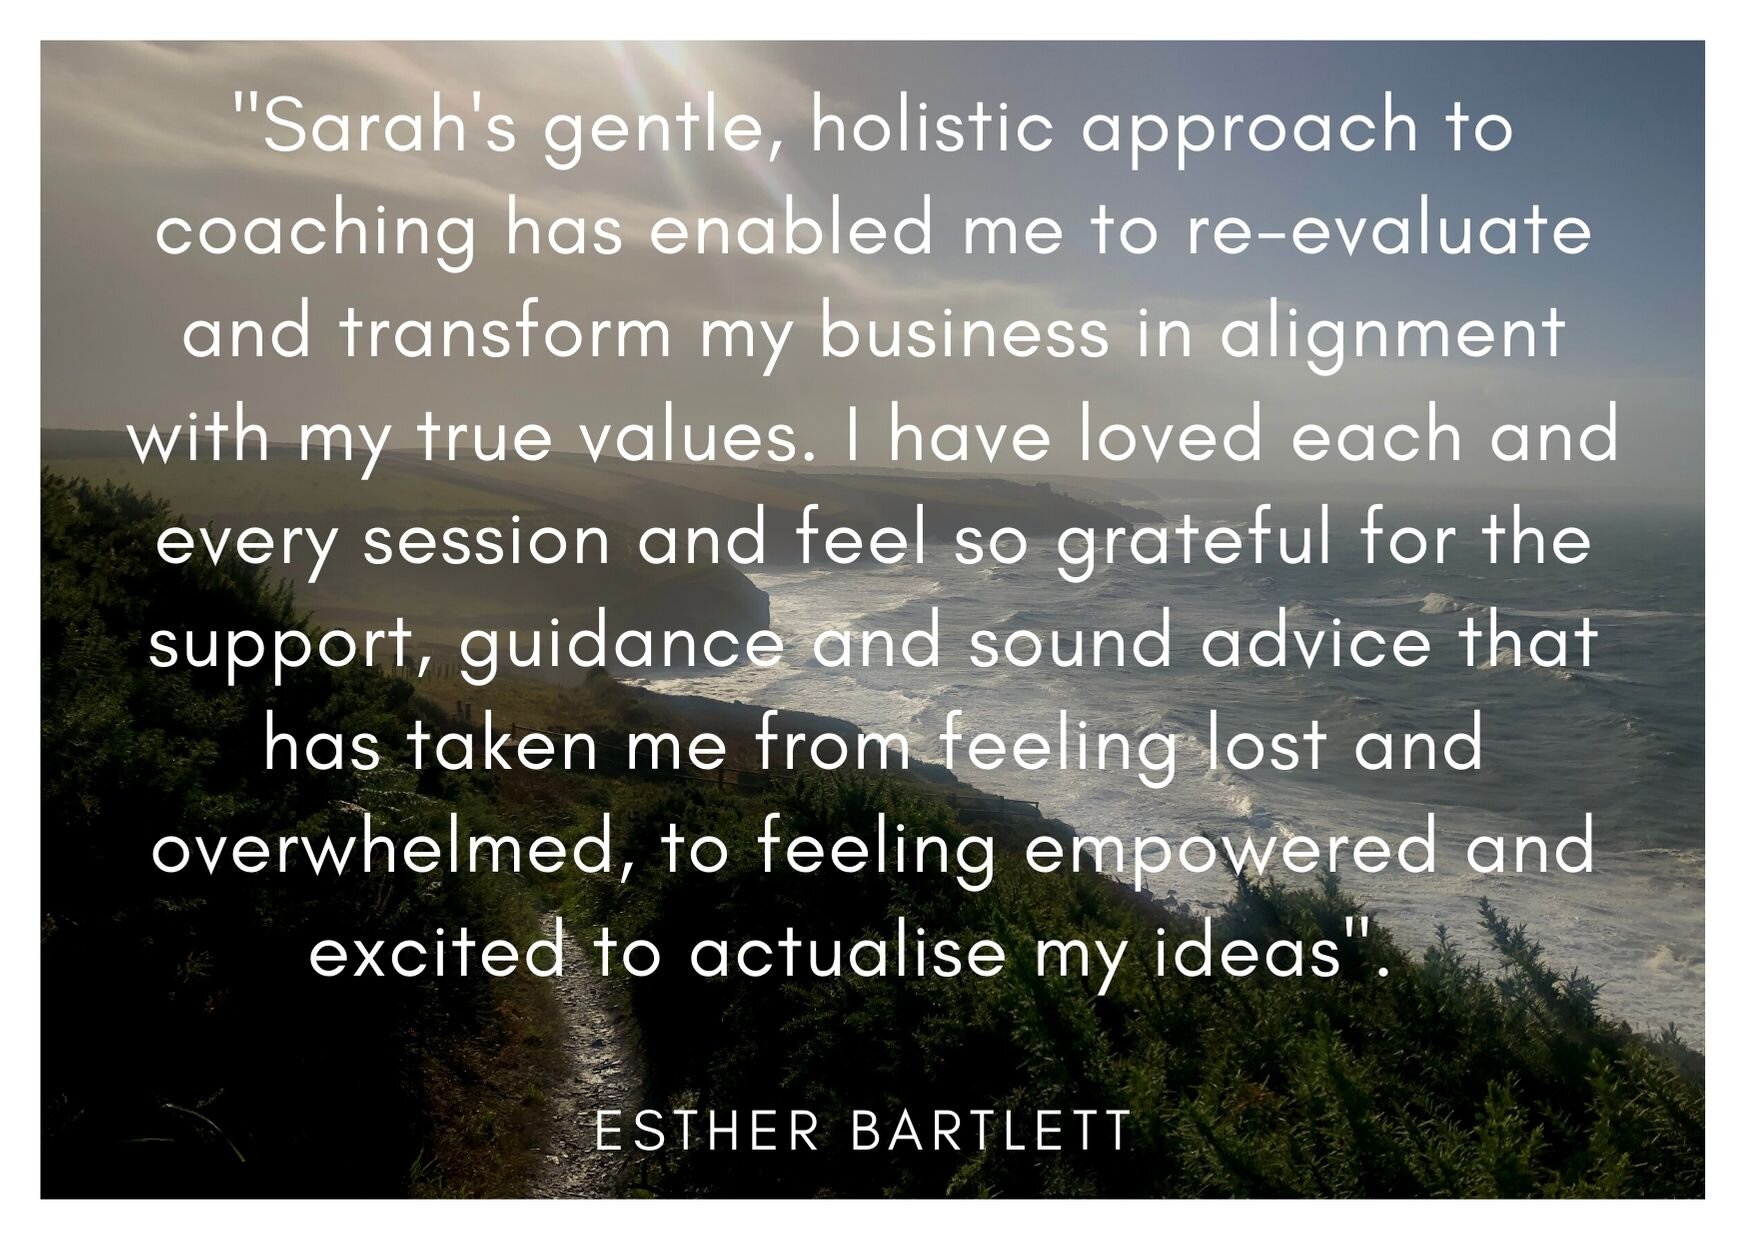 Sarah's gentle, holistic approach to coaching has enabled me to re-evaluate and transform my business in alignment with my true values. I have loved each and every session and feel so grateful for the support, guidan.jpg